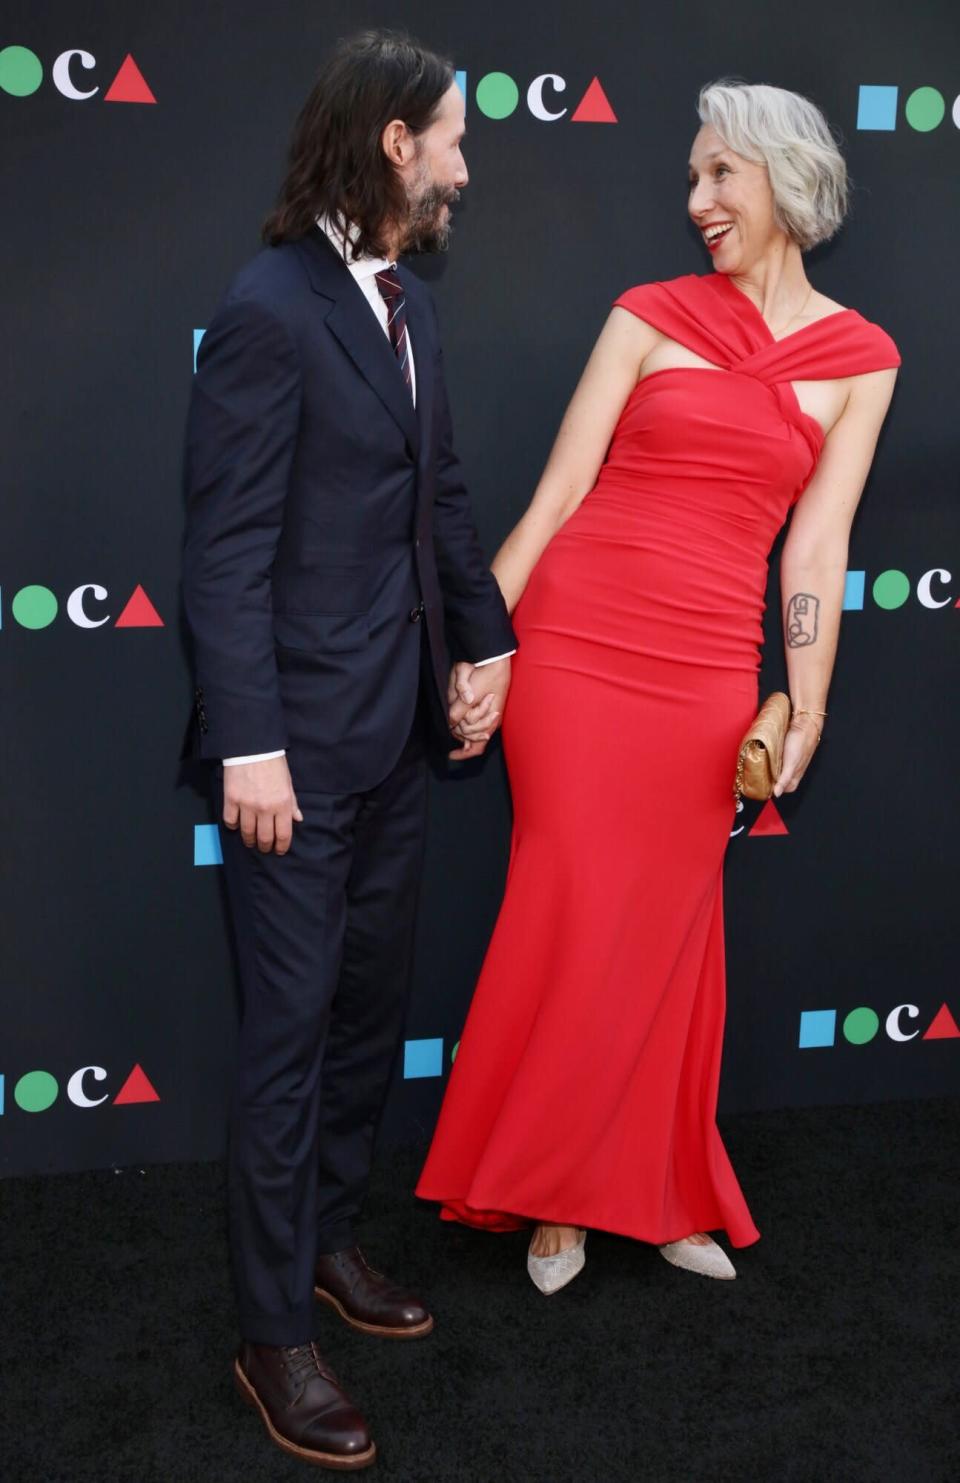 LOS ANGELES, CALIFORNIA - JUNE 4: Keanu Reeves and Alexandra Grant attend the MOCA Gala 2022 at The Geffen Contemporary at MOCA on June 4, 2022 in Los Angeles, California.  (Photo by Robin L Marshall / Getty Images)